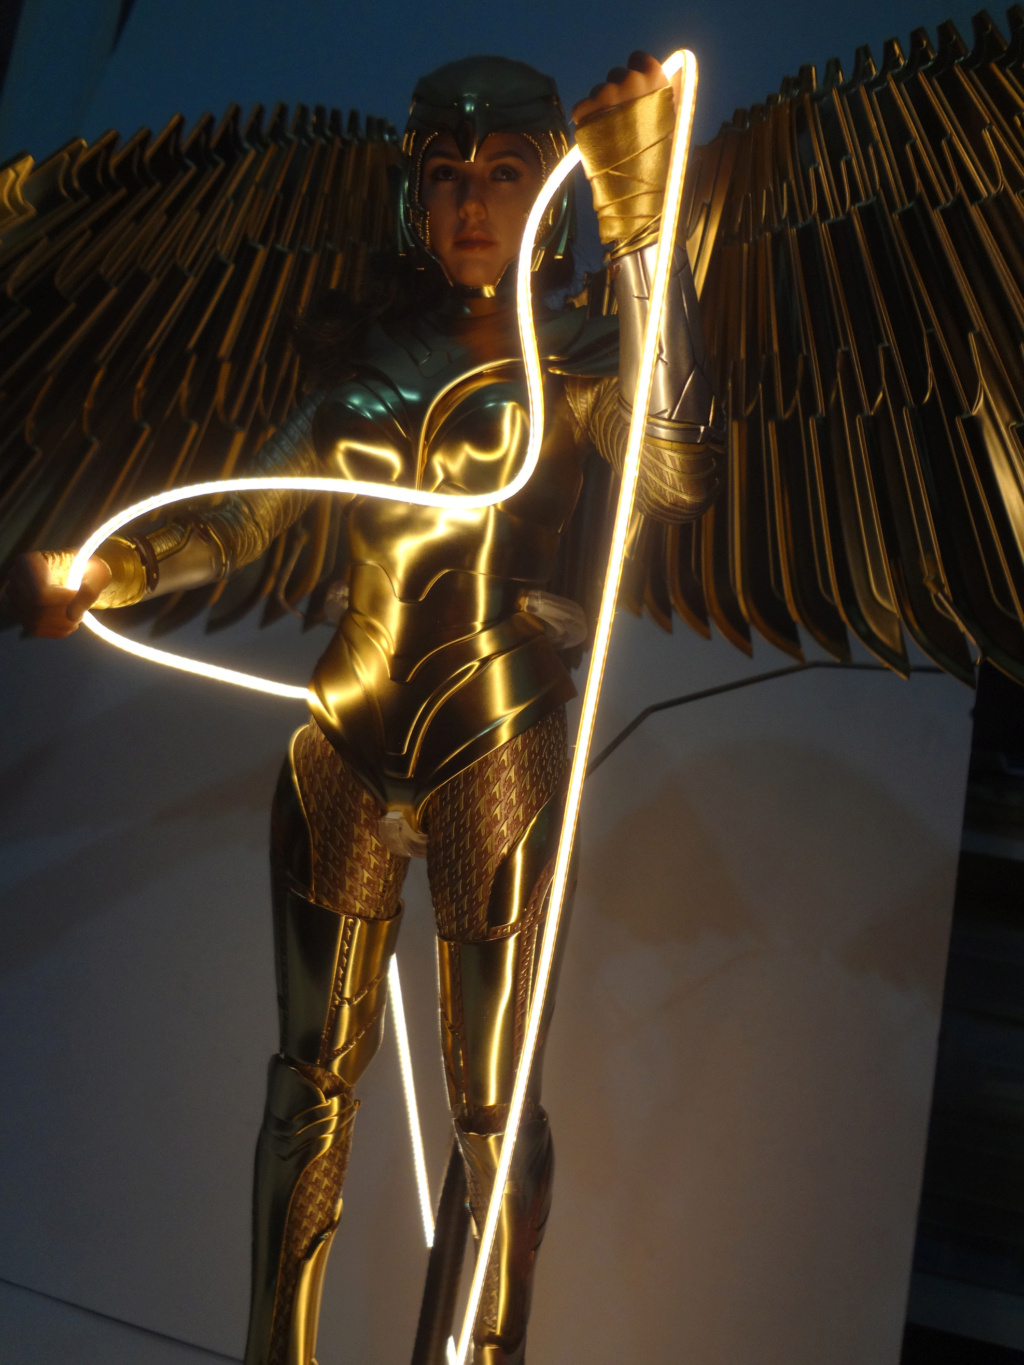 Movie - NEW PRODUCT: HOT TOYS: WONDER WOMAN 1984: GOLDEN ARMOR WONDER WOMAN 1/6TH SCALE COLLECTIBLE FIGURE (Standard & Deluxe Versions) - Page 2 Dsc04217